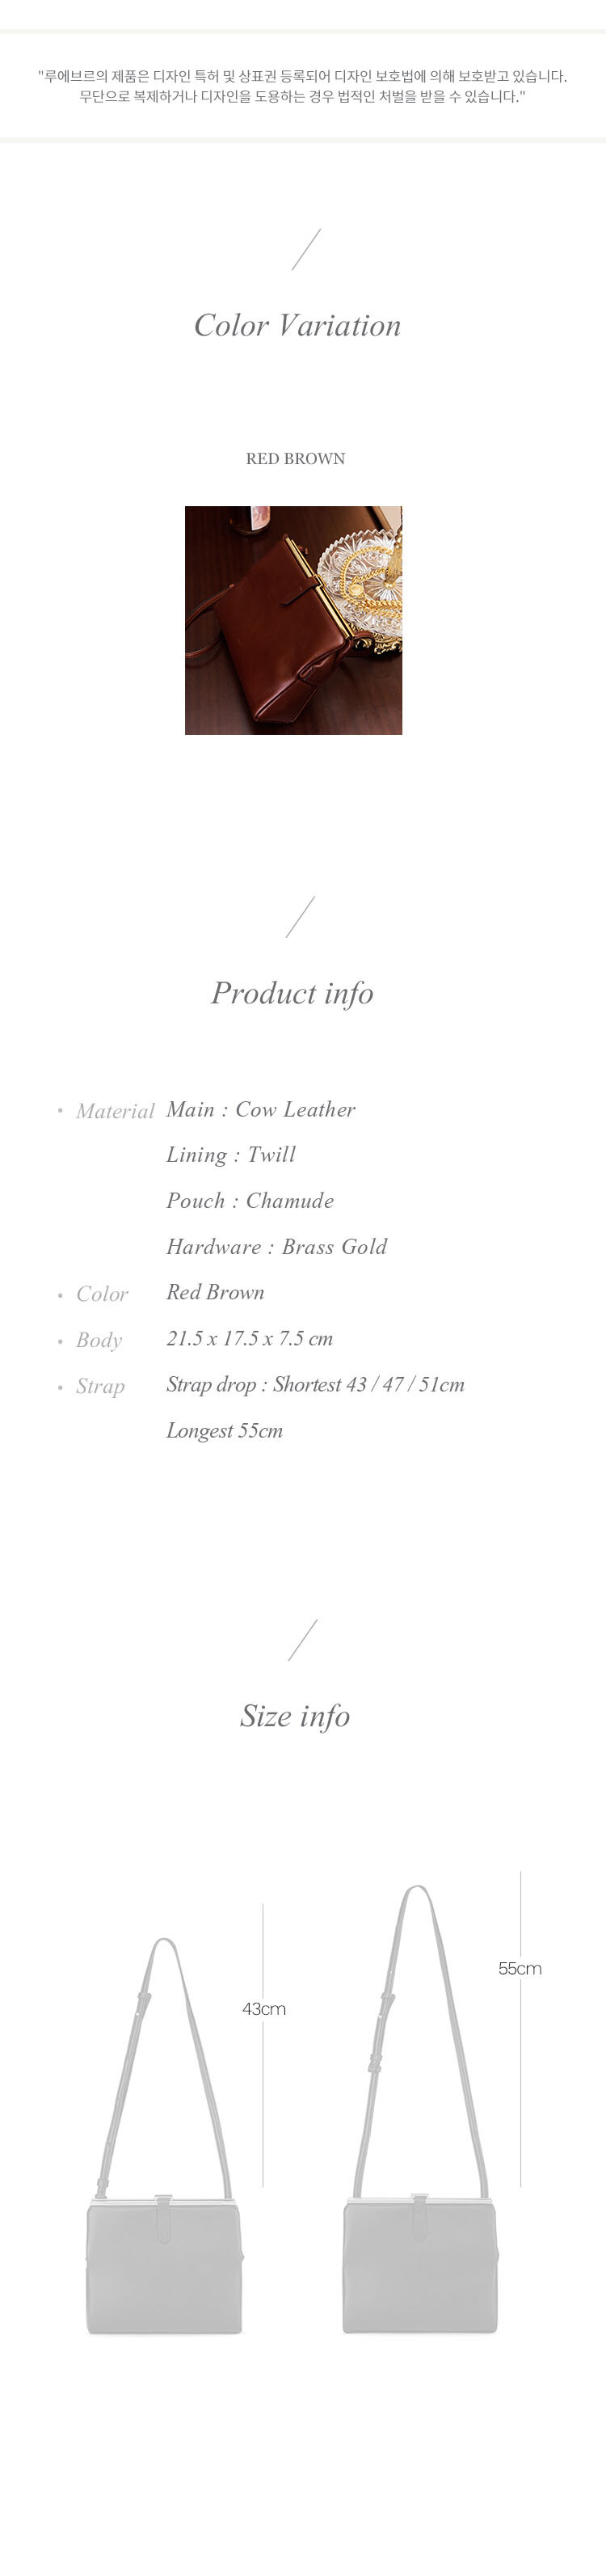 product_info